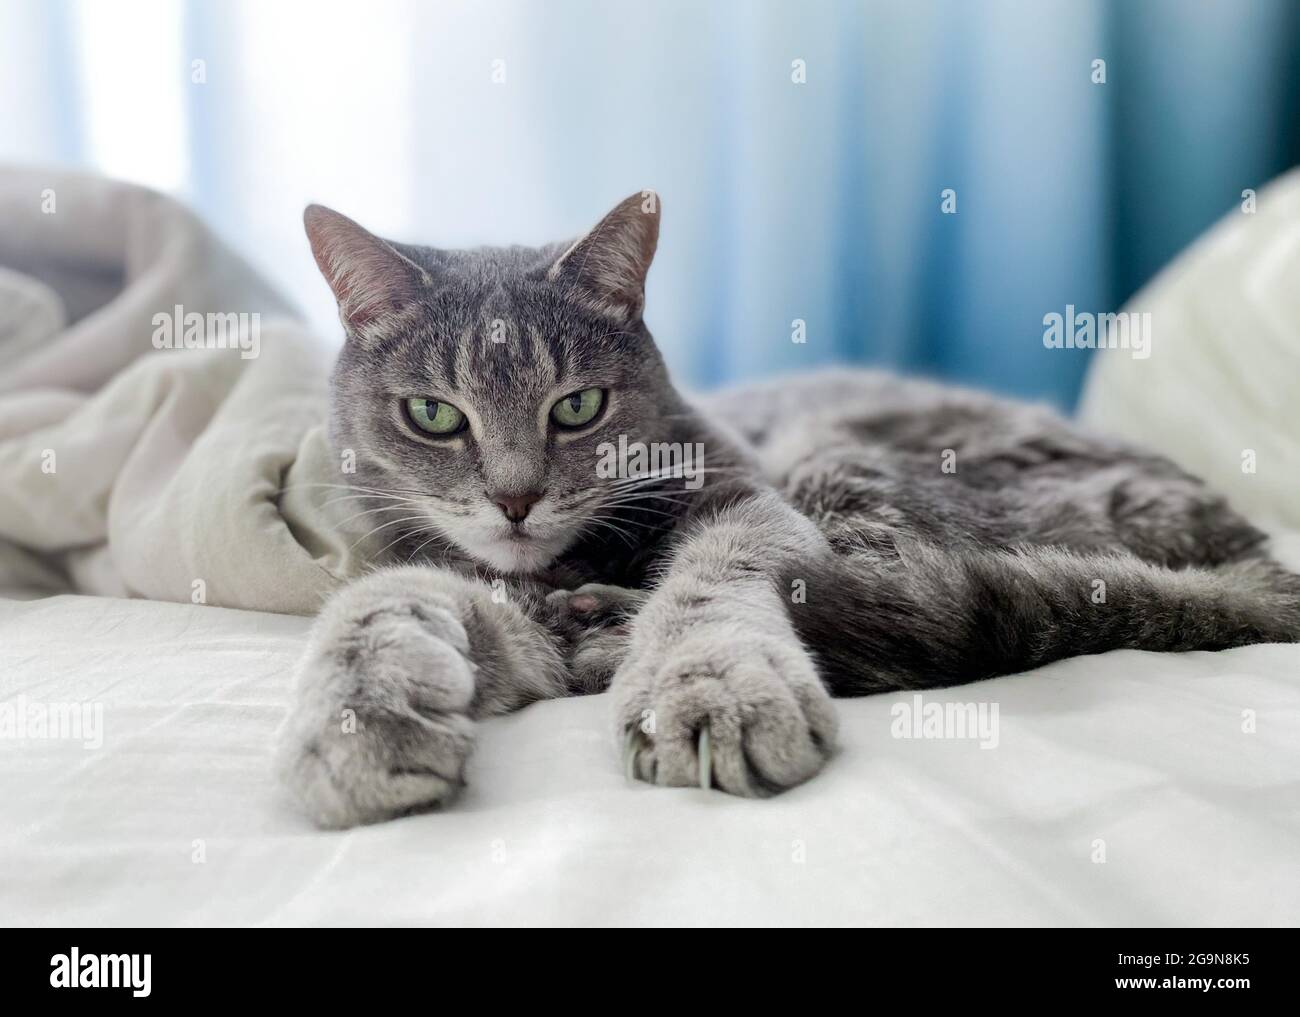 A beautiful gray cat is lying on the owner's bed, comfortably settled, with its paws outstretched. Stock Photo